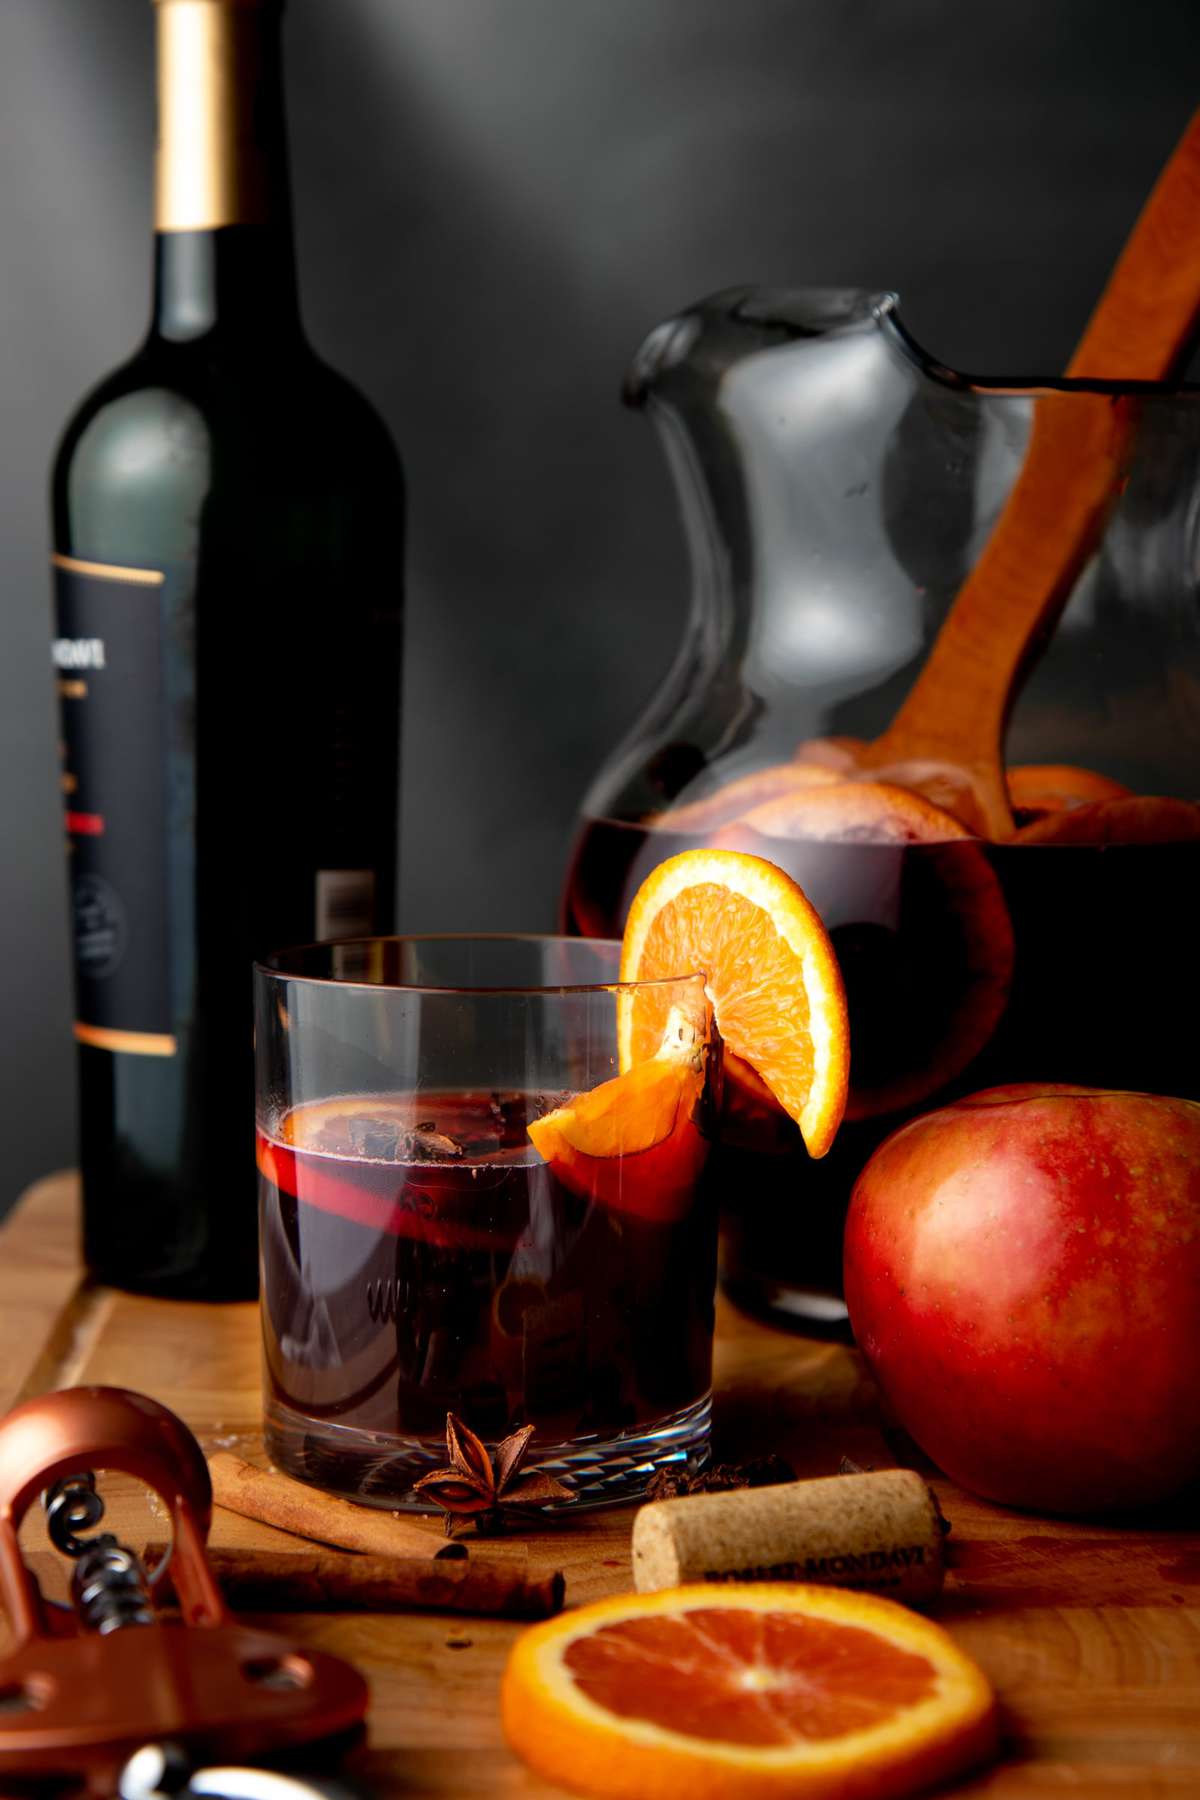 A rocks glass of apple cider sangria sits on a wooden cutting board in front of a bottle of red wine and pitcher of sangria.